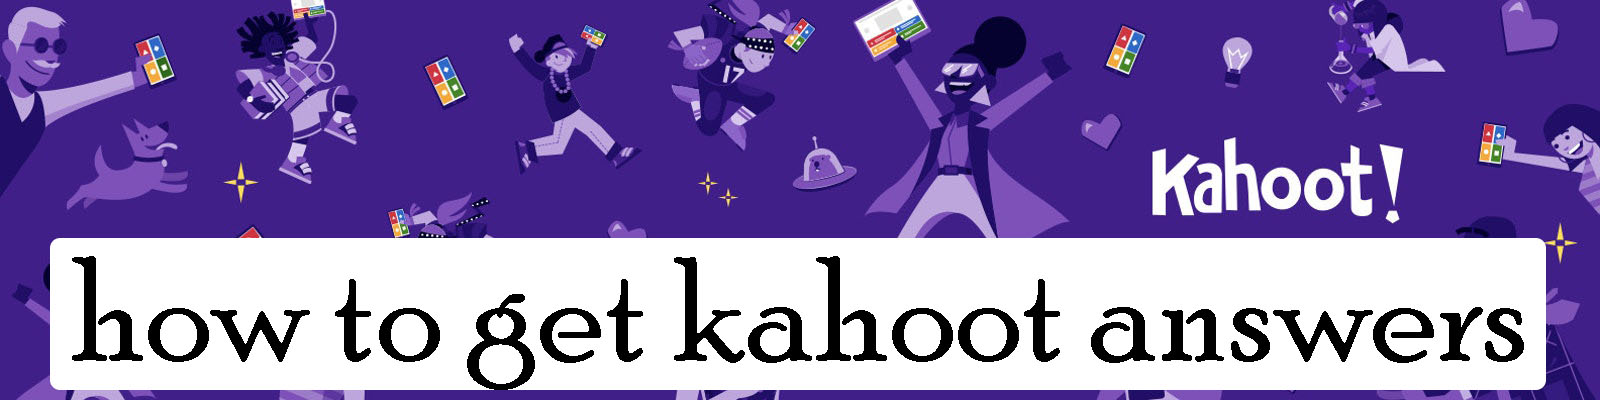 how to get kahoot answers